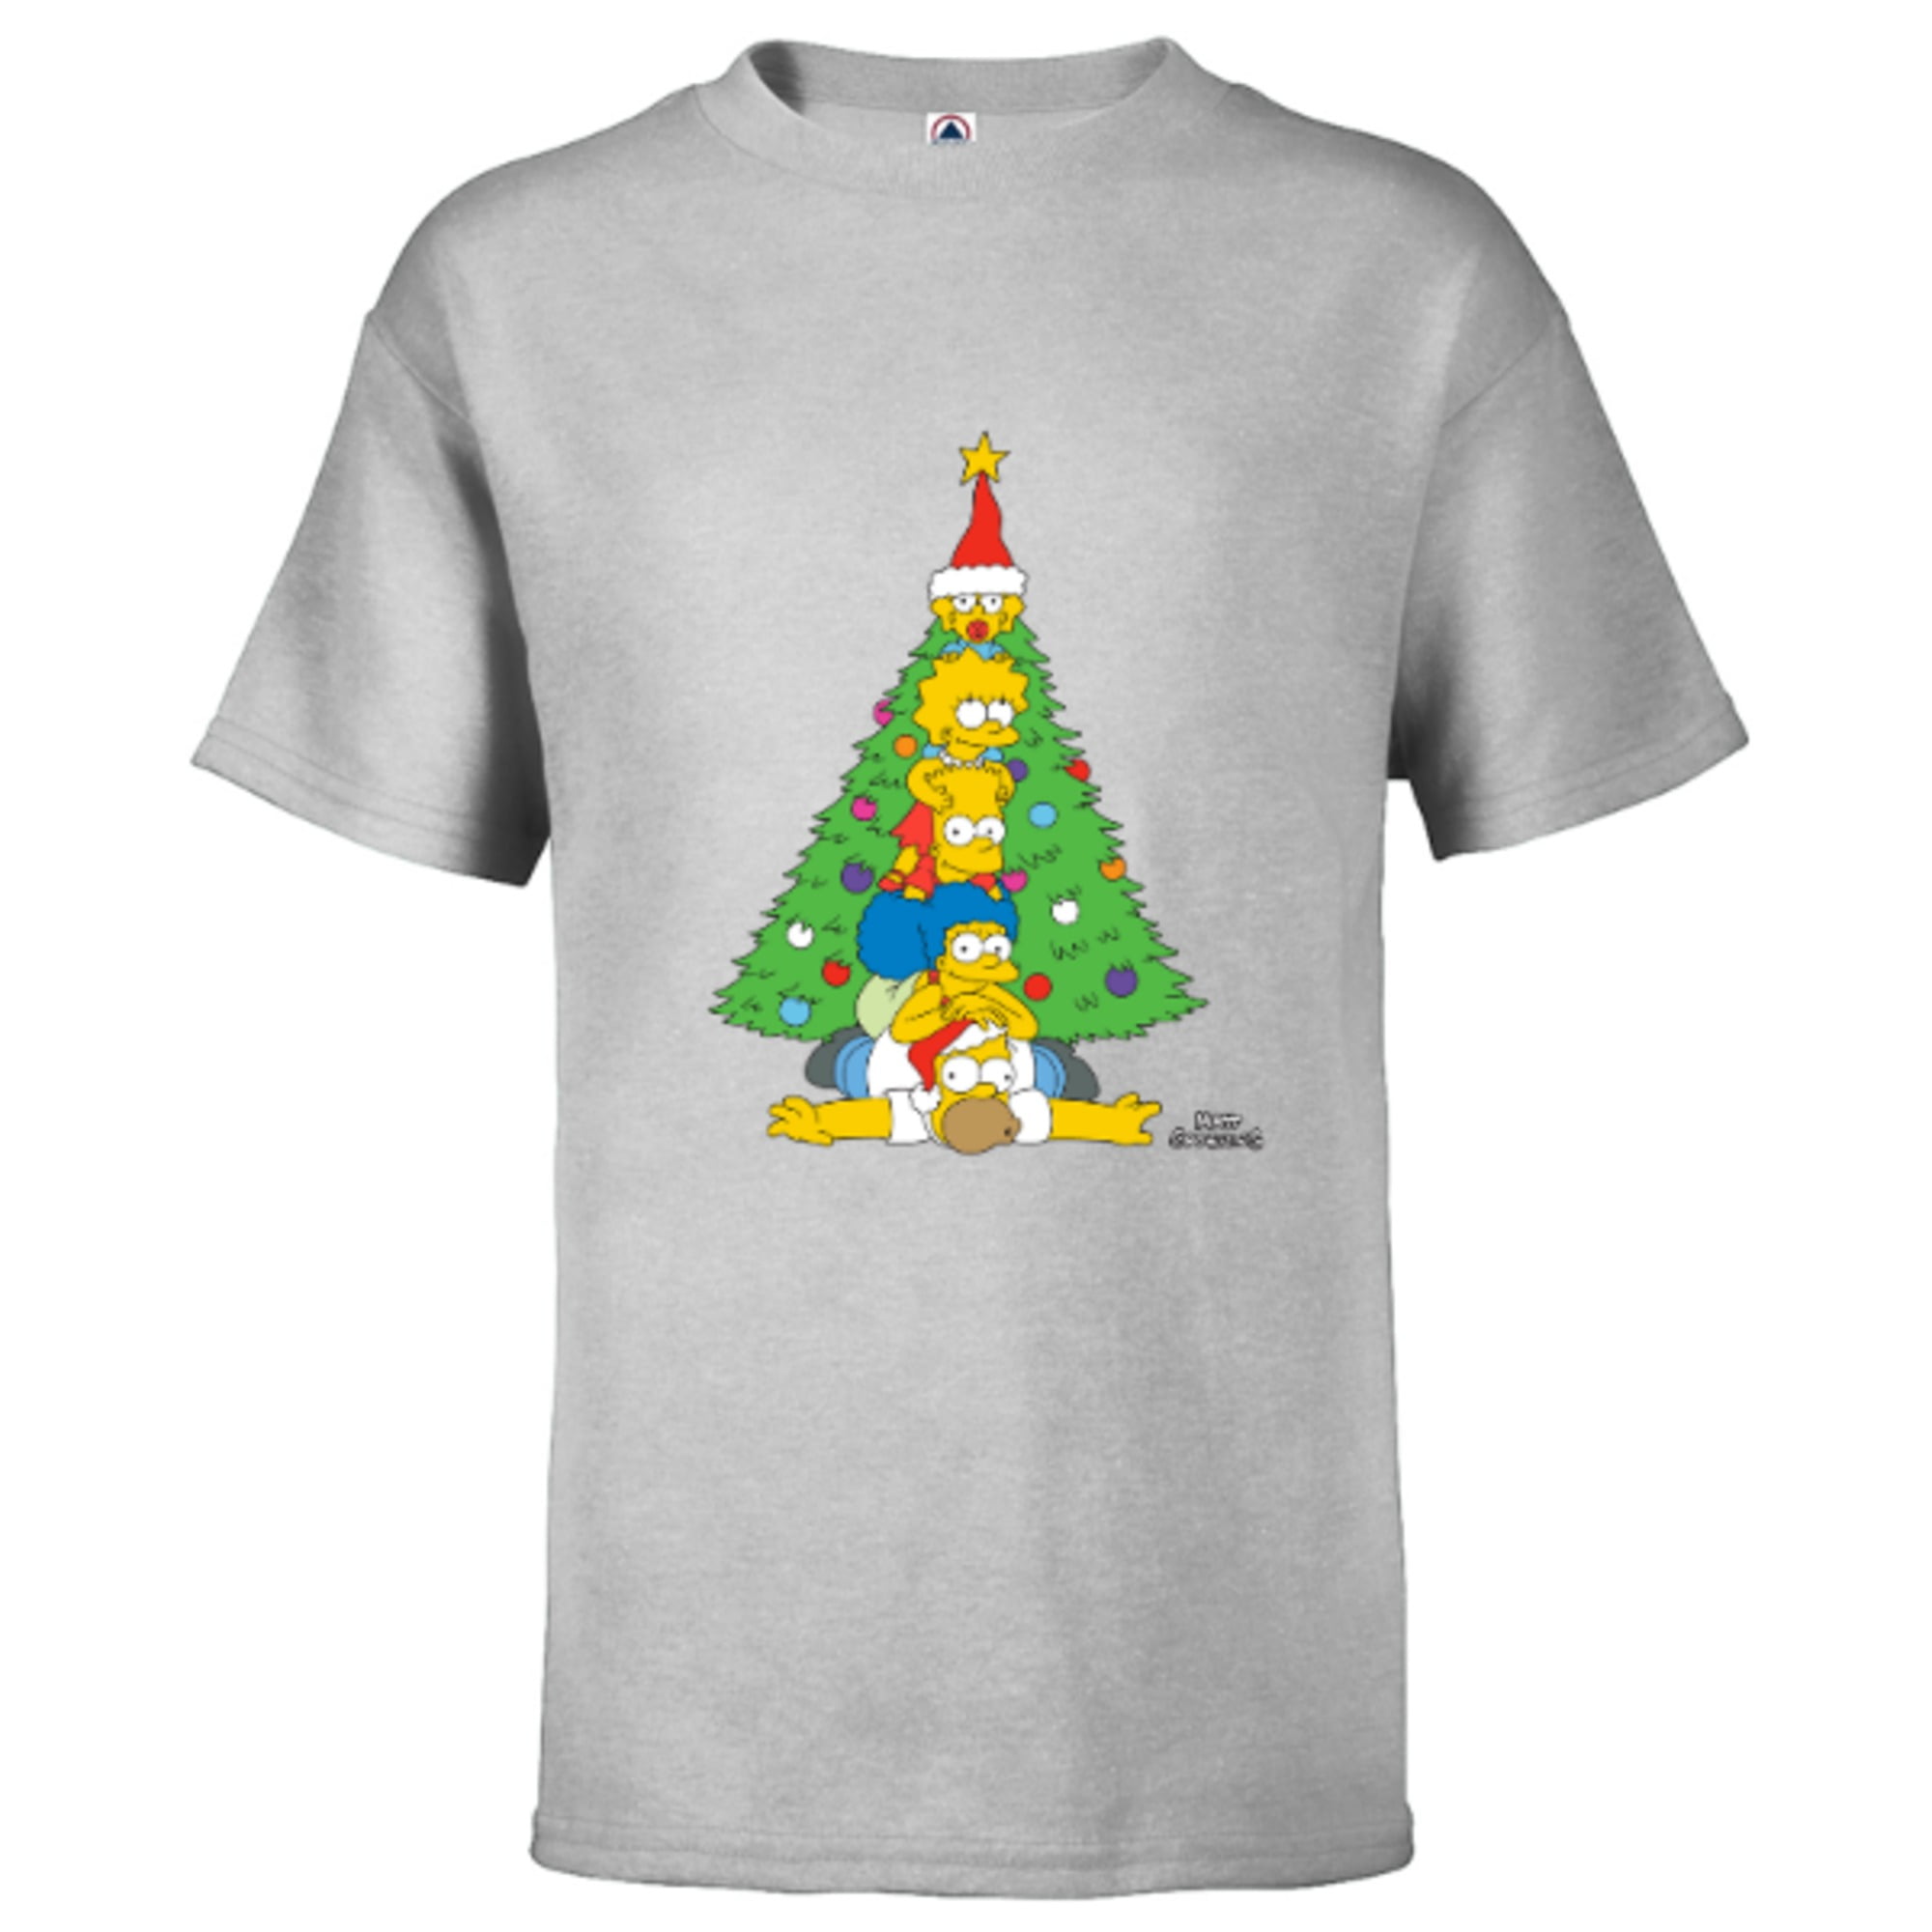 The Short Kids T-Shirt Christmas - Simpsons Customized-Red Family Sleeve Holiday for – Tree